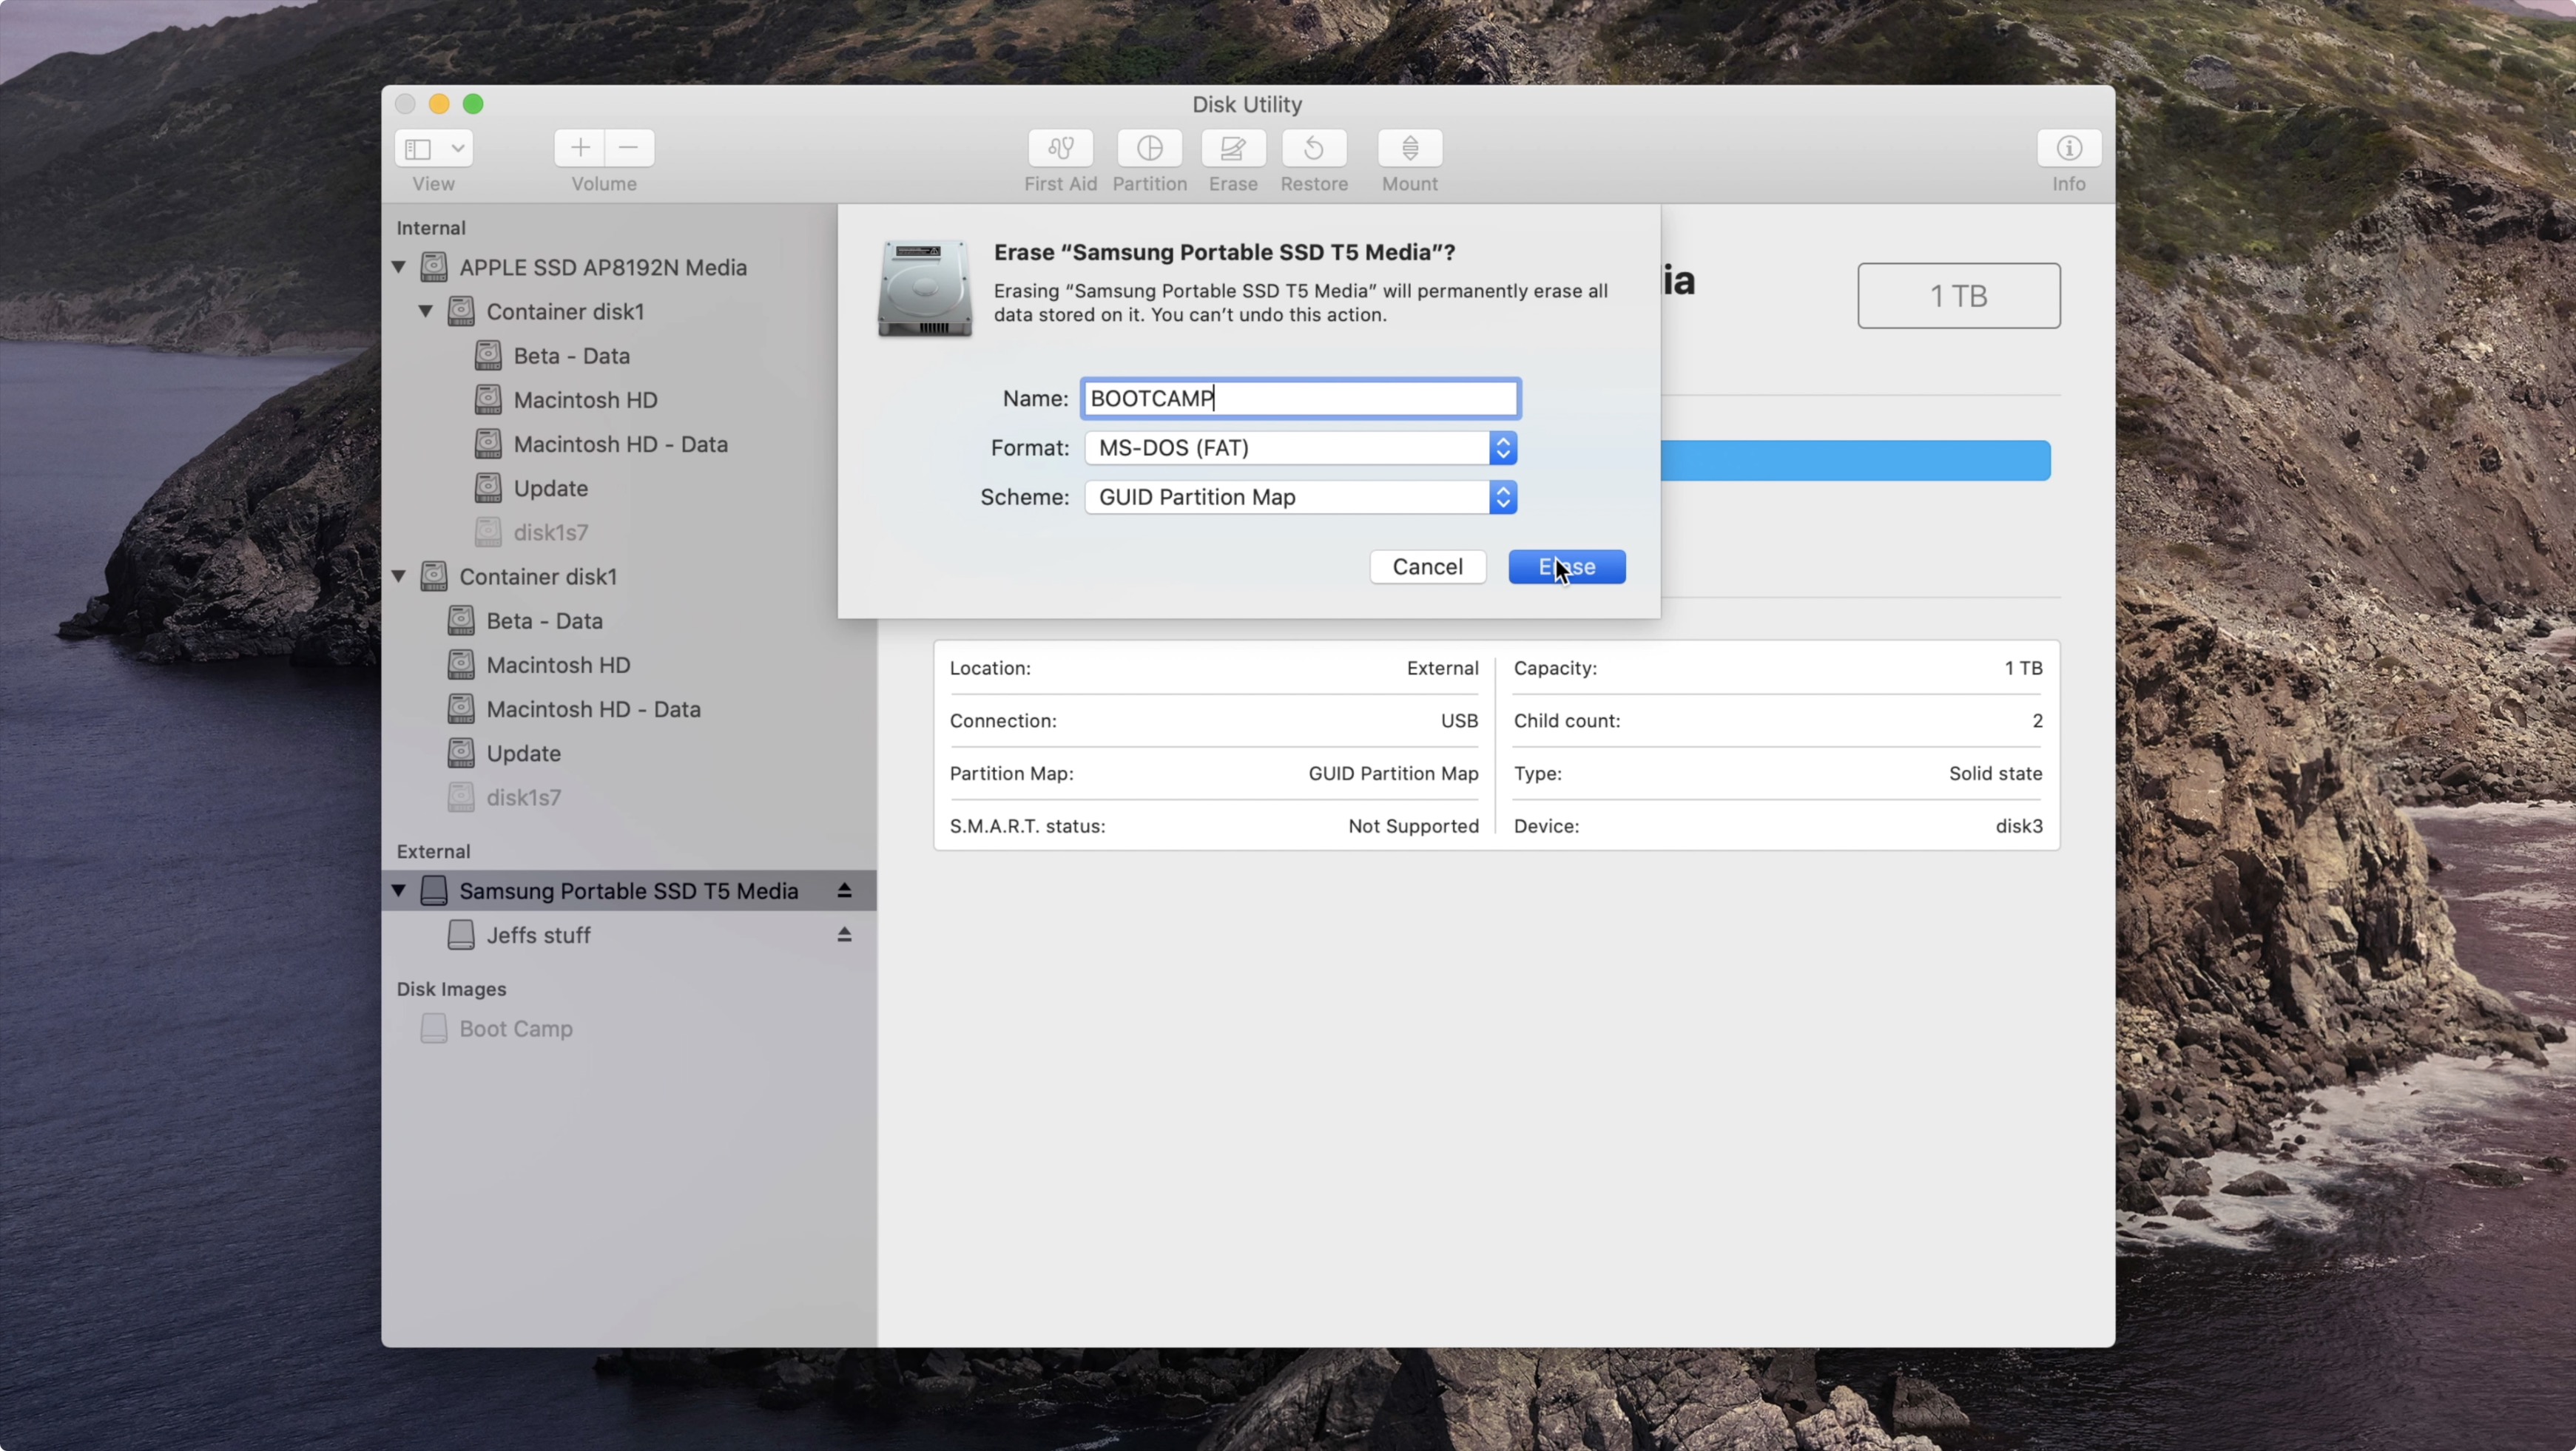 format a drive for windows 8 and mac osx